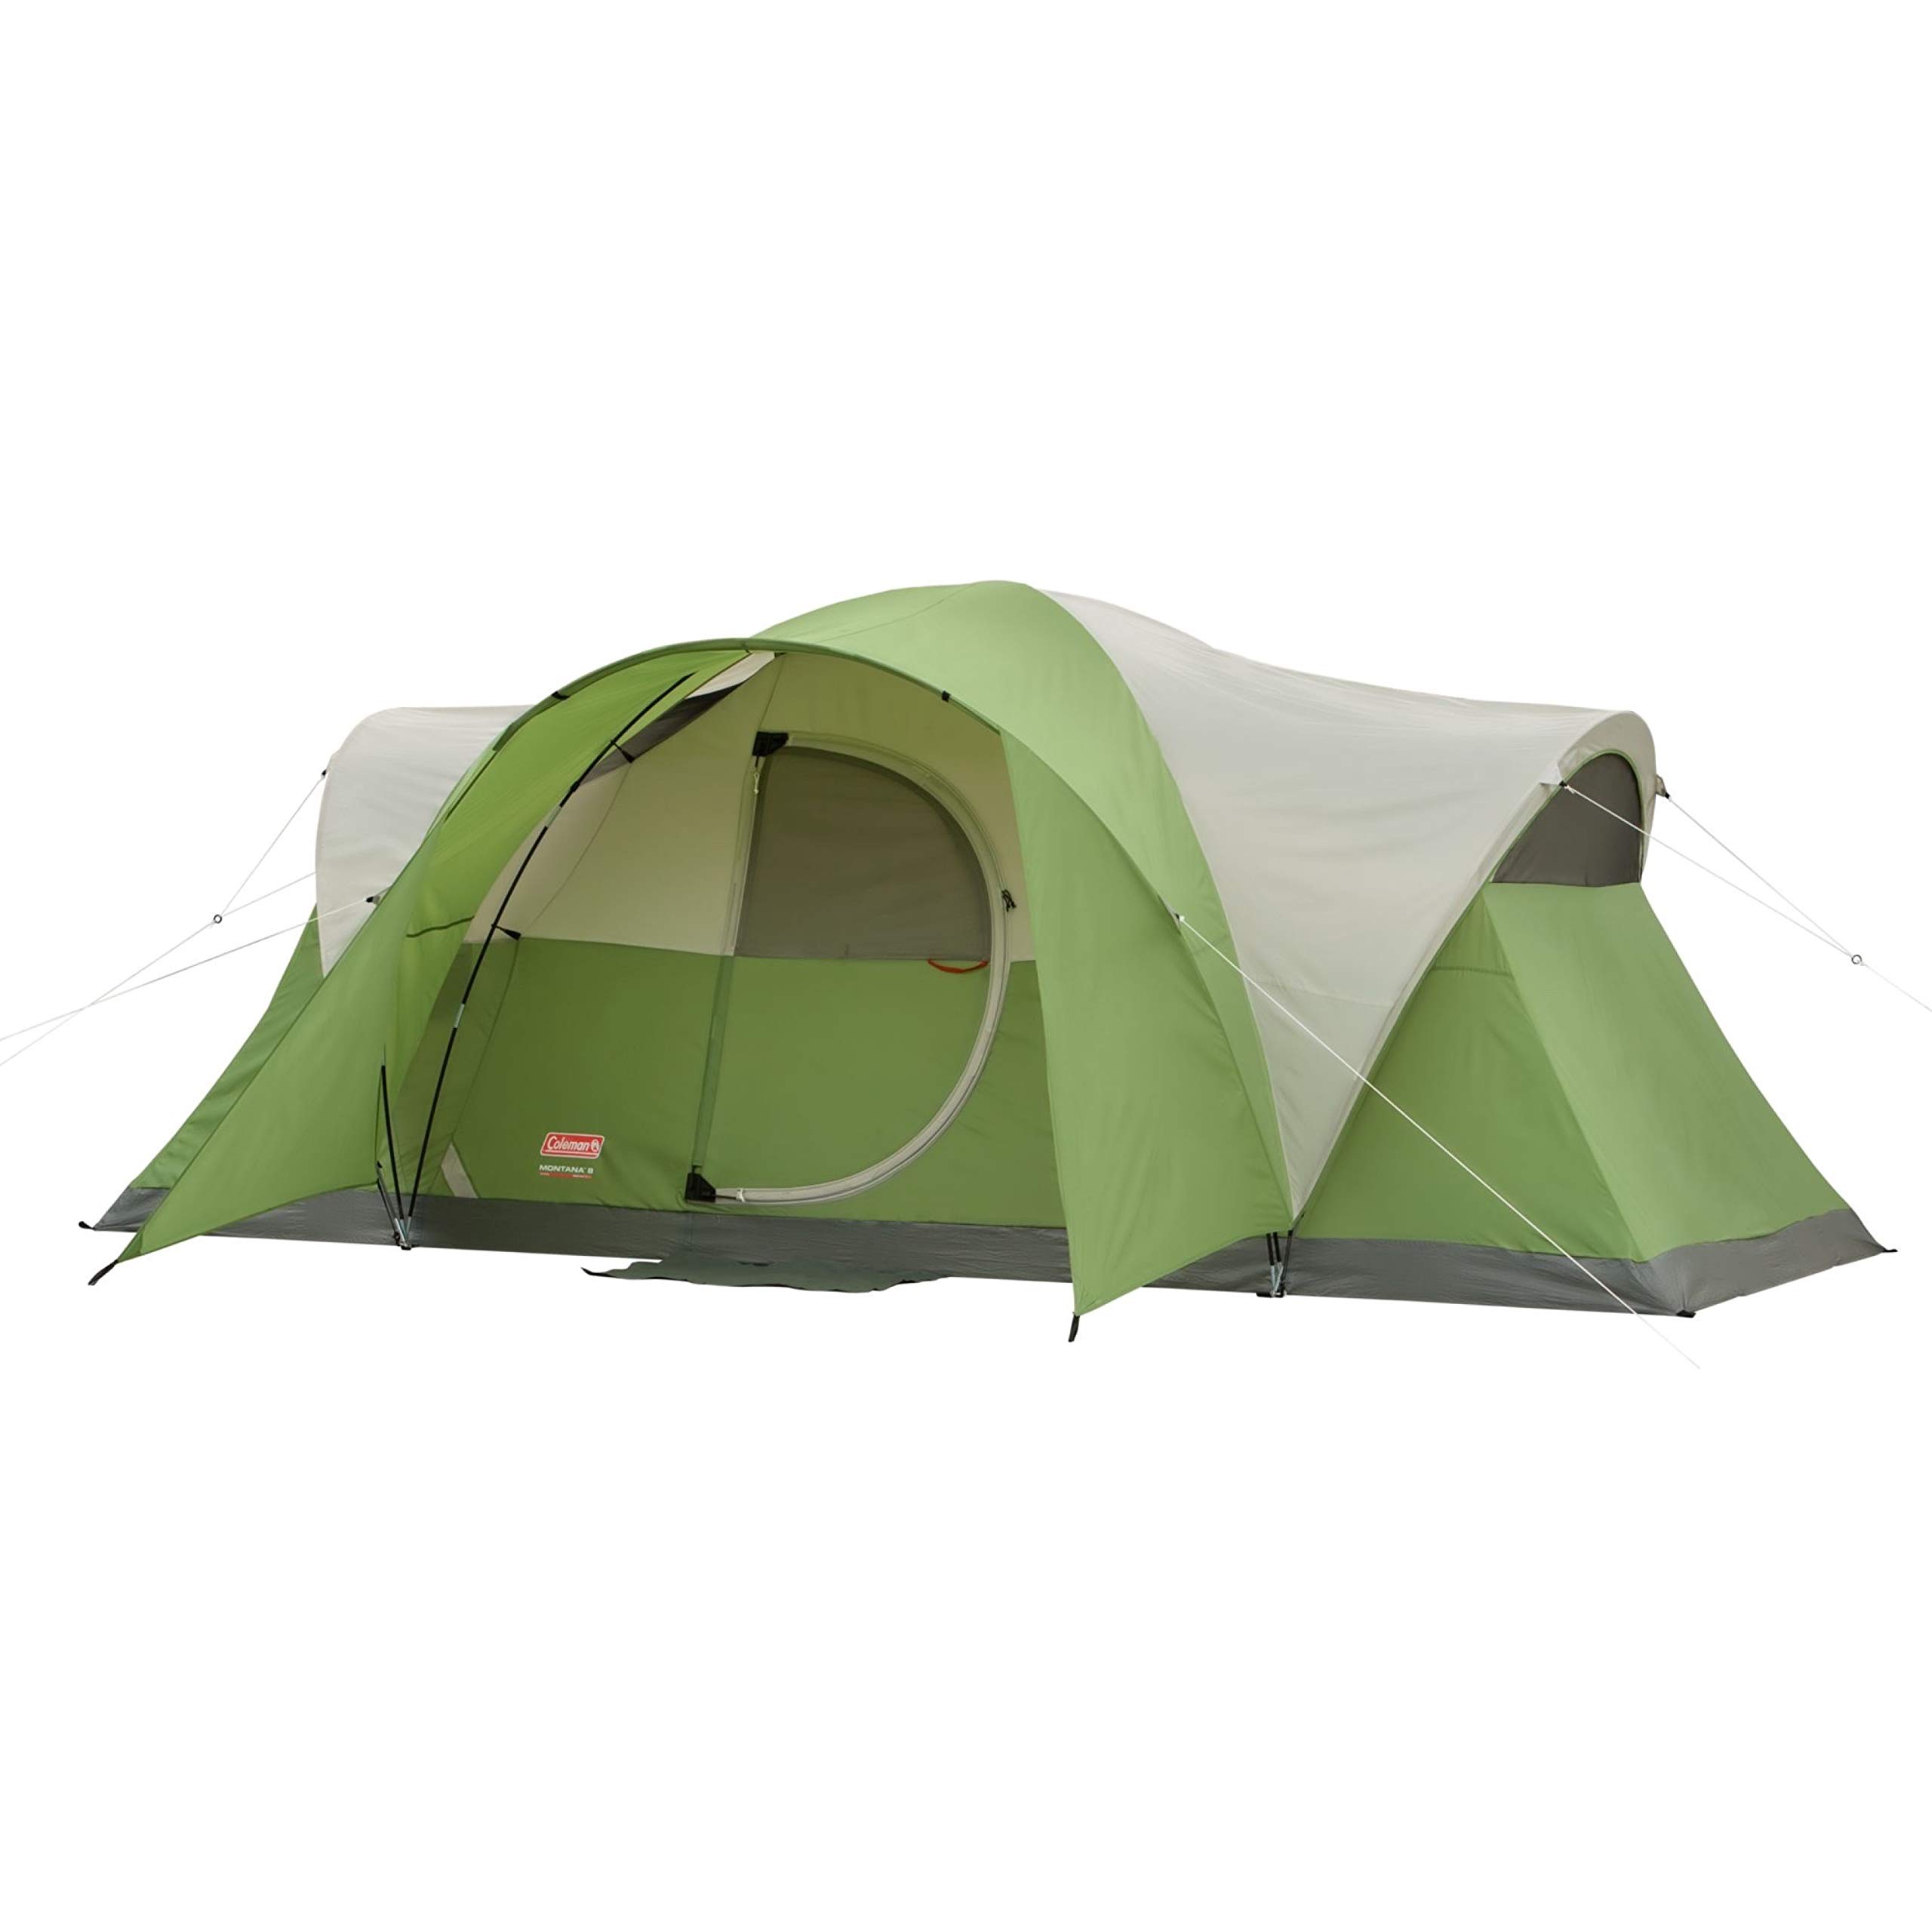 <a href="https://www.amazon.com/Colegence-Oversized-Camping-Support-Included/dp/B0CF9GQRBC?tag=thecampfire0d-20"><a href="https://www.amazon.com/dp/B001RPFAFW?%3Fth=1&psc=1&tag=thecampfire0d-20">Coleman Montana 6-Person Camping Tent</a></a>